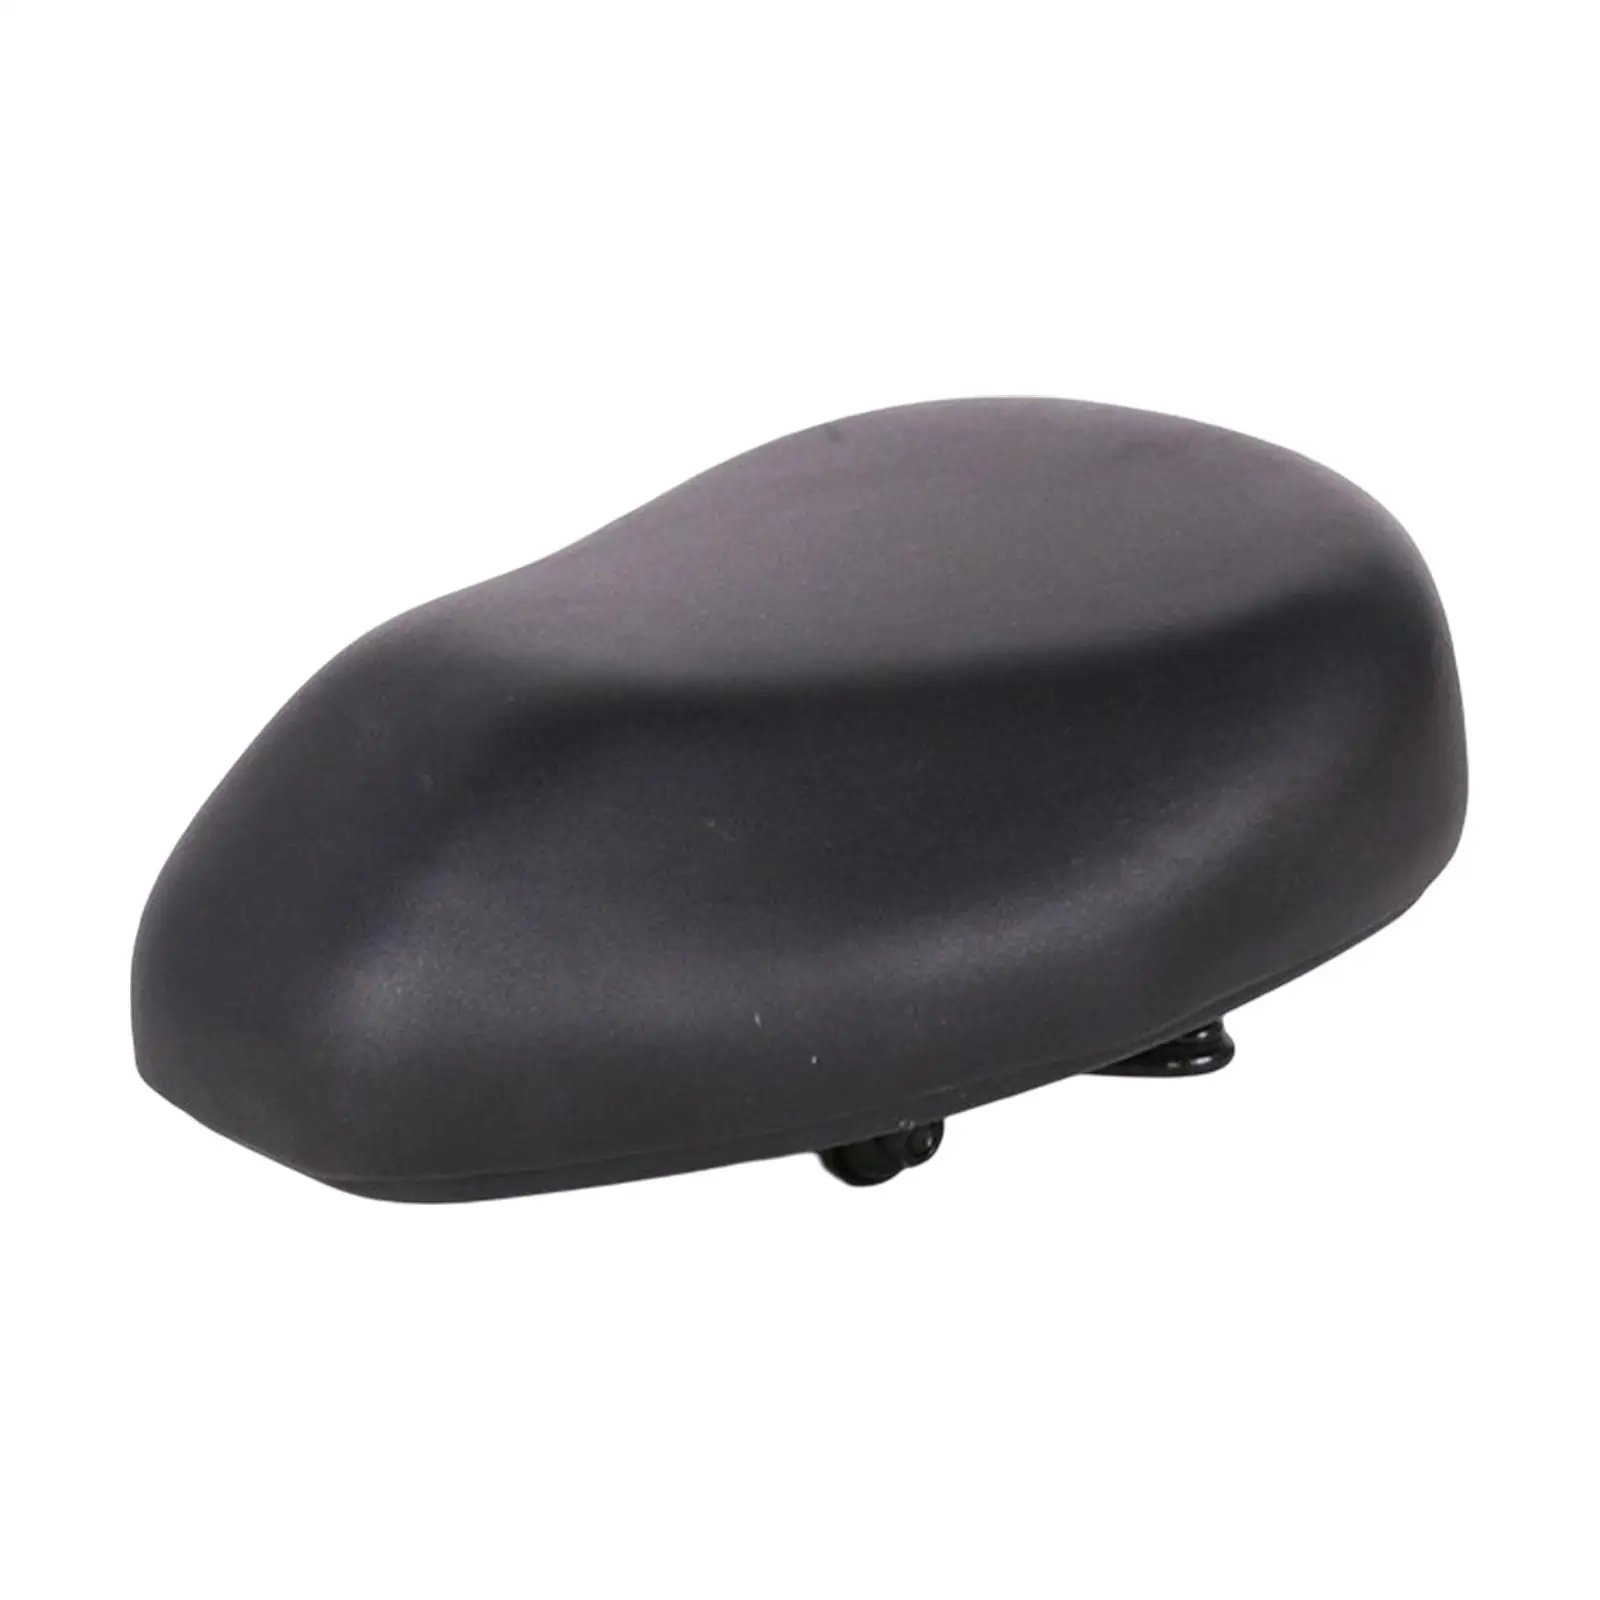 Bike Seat Cushion Replacement Saddle Wide Comfortable Soft Shock Absorbing Fit for Electric Scooter Mountain Bike Road Bike